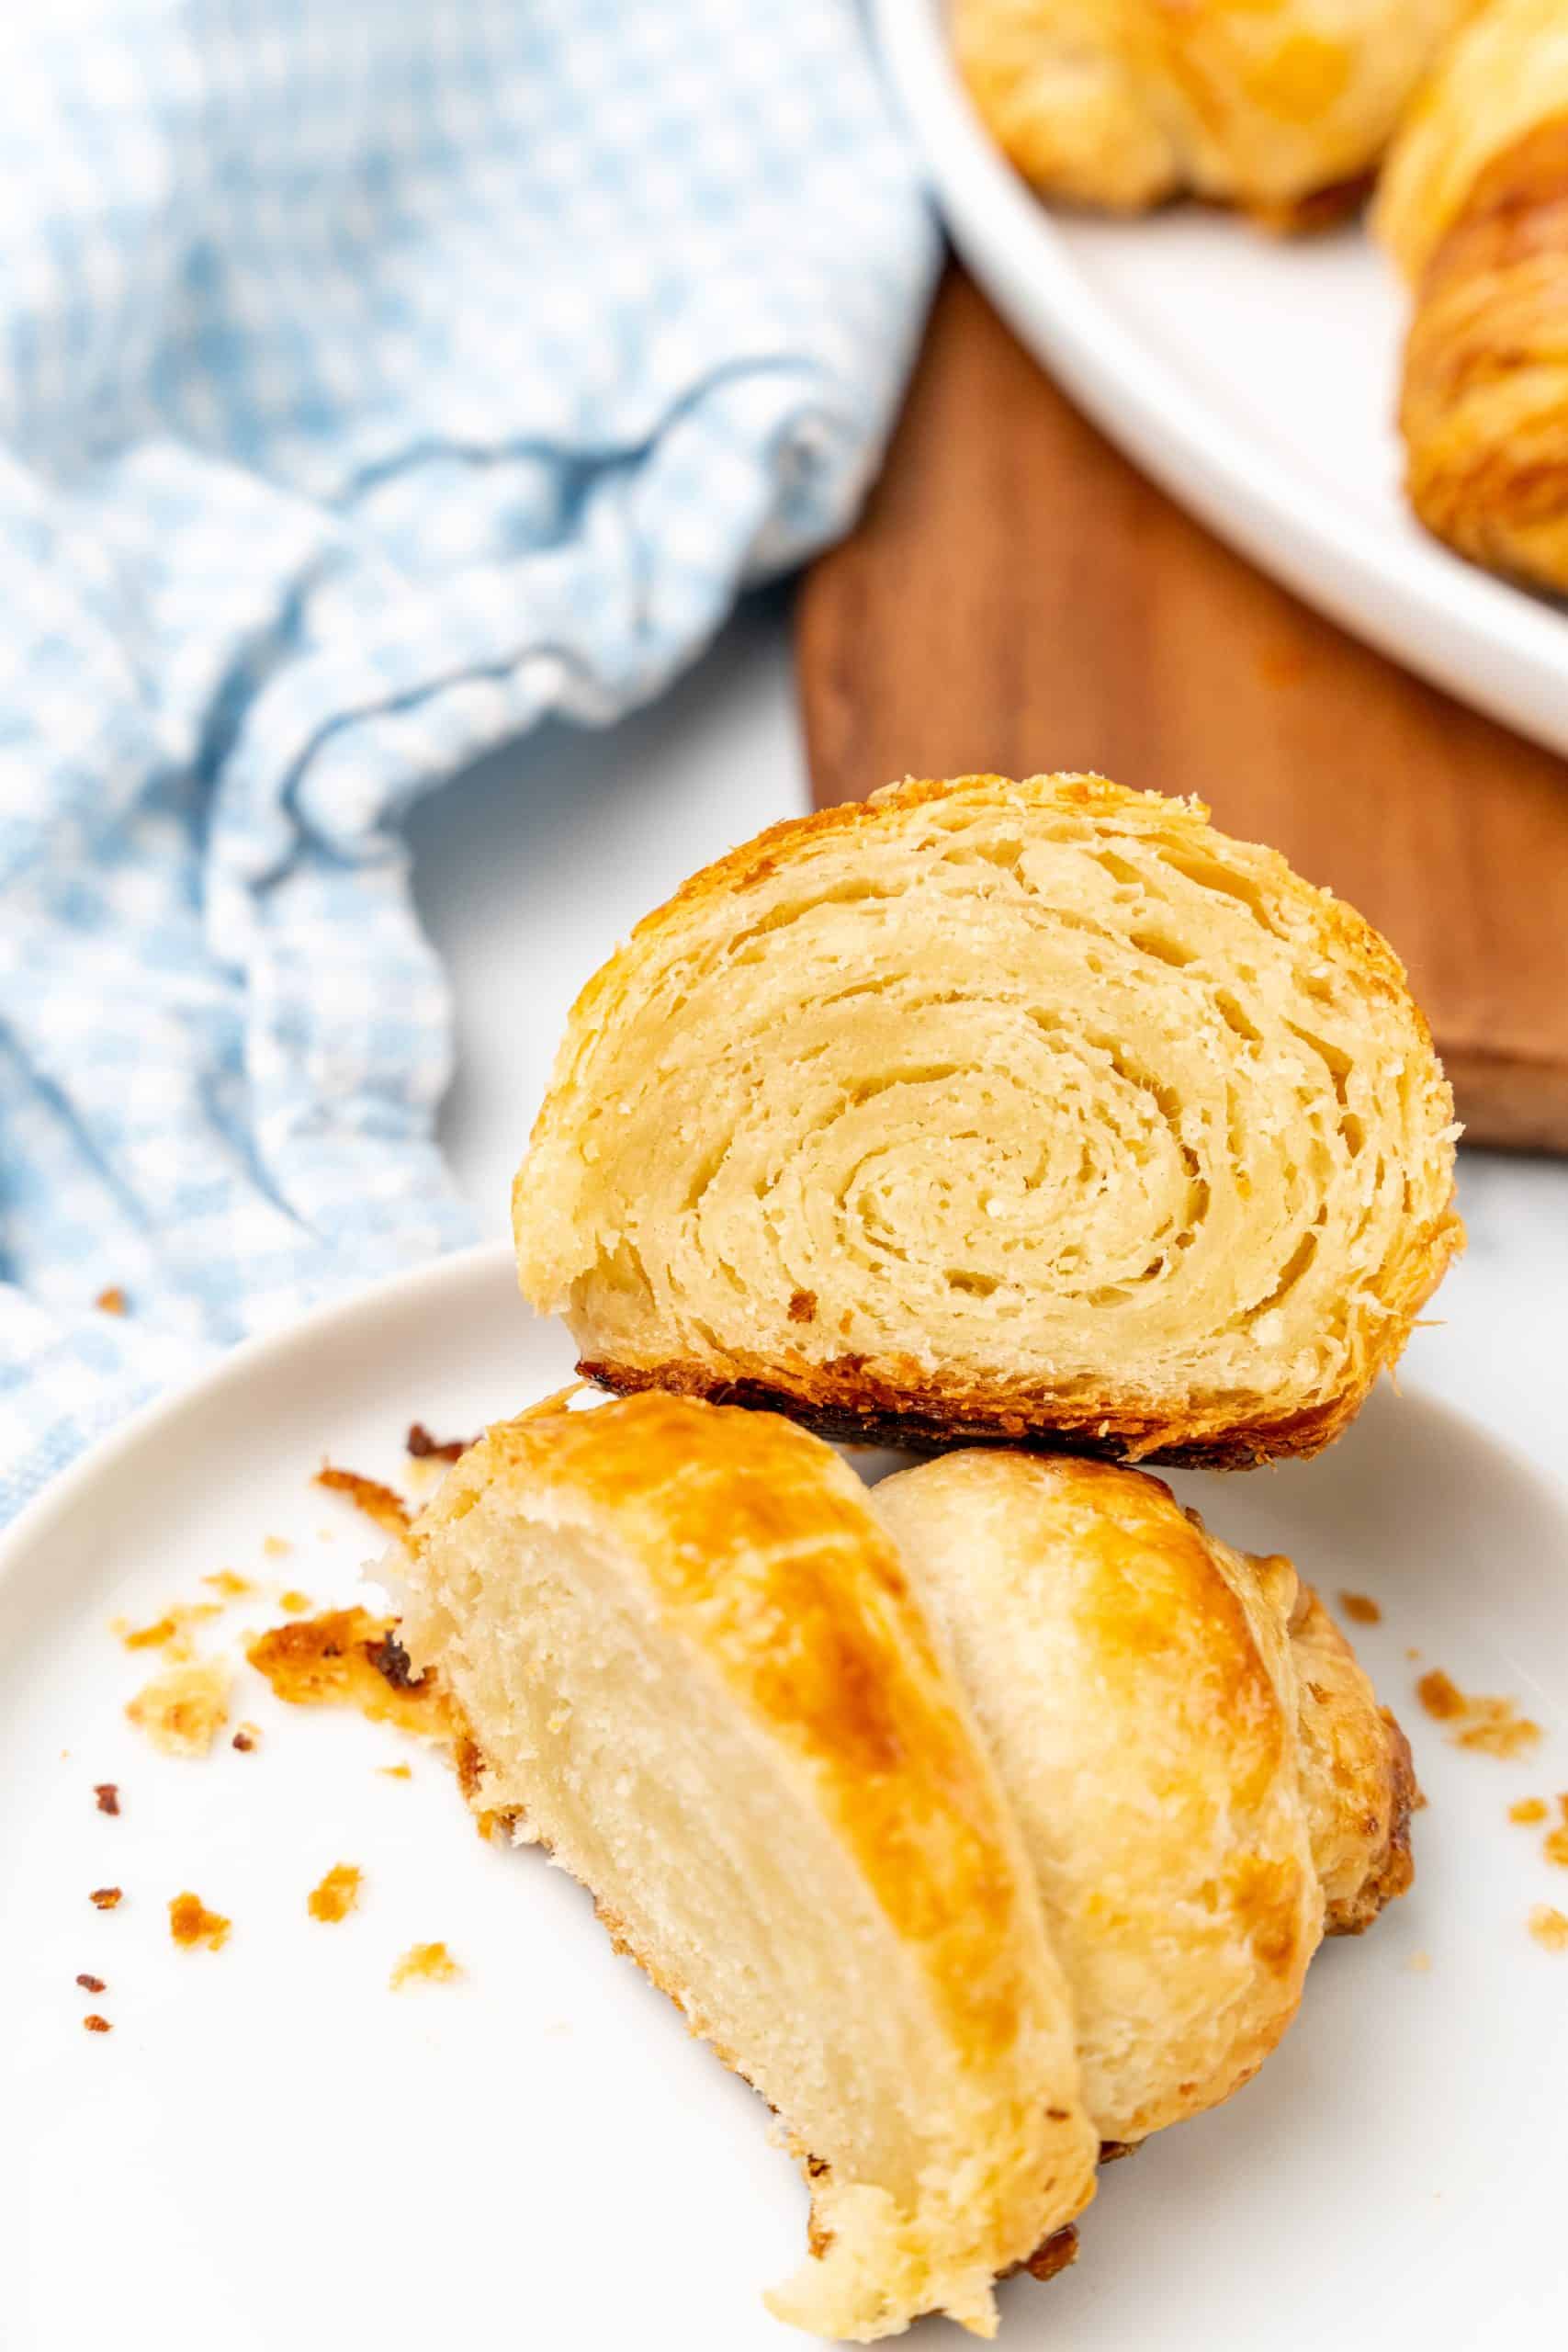 two halves of a flake homemade croissant roll resting on a small white plate